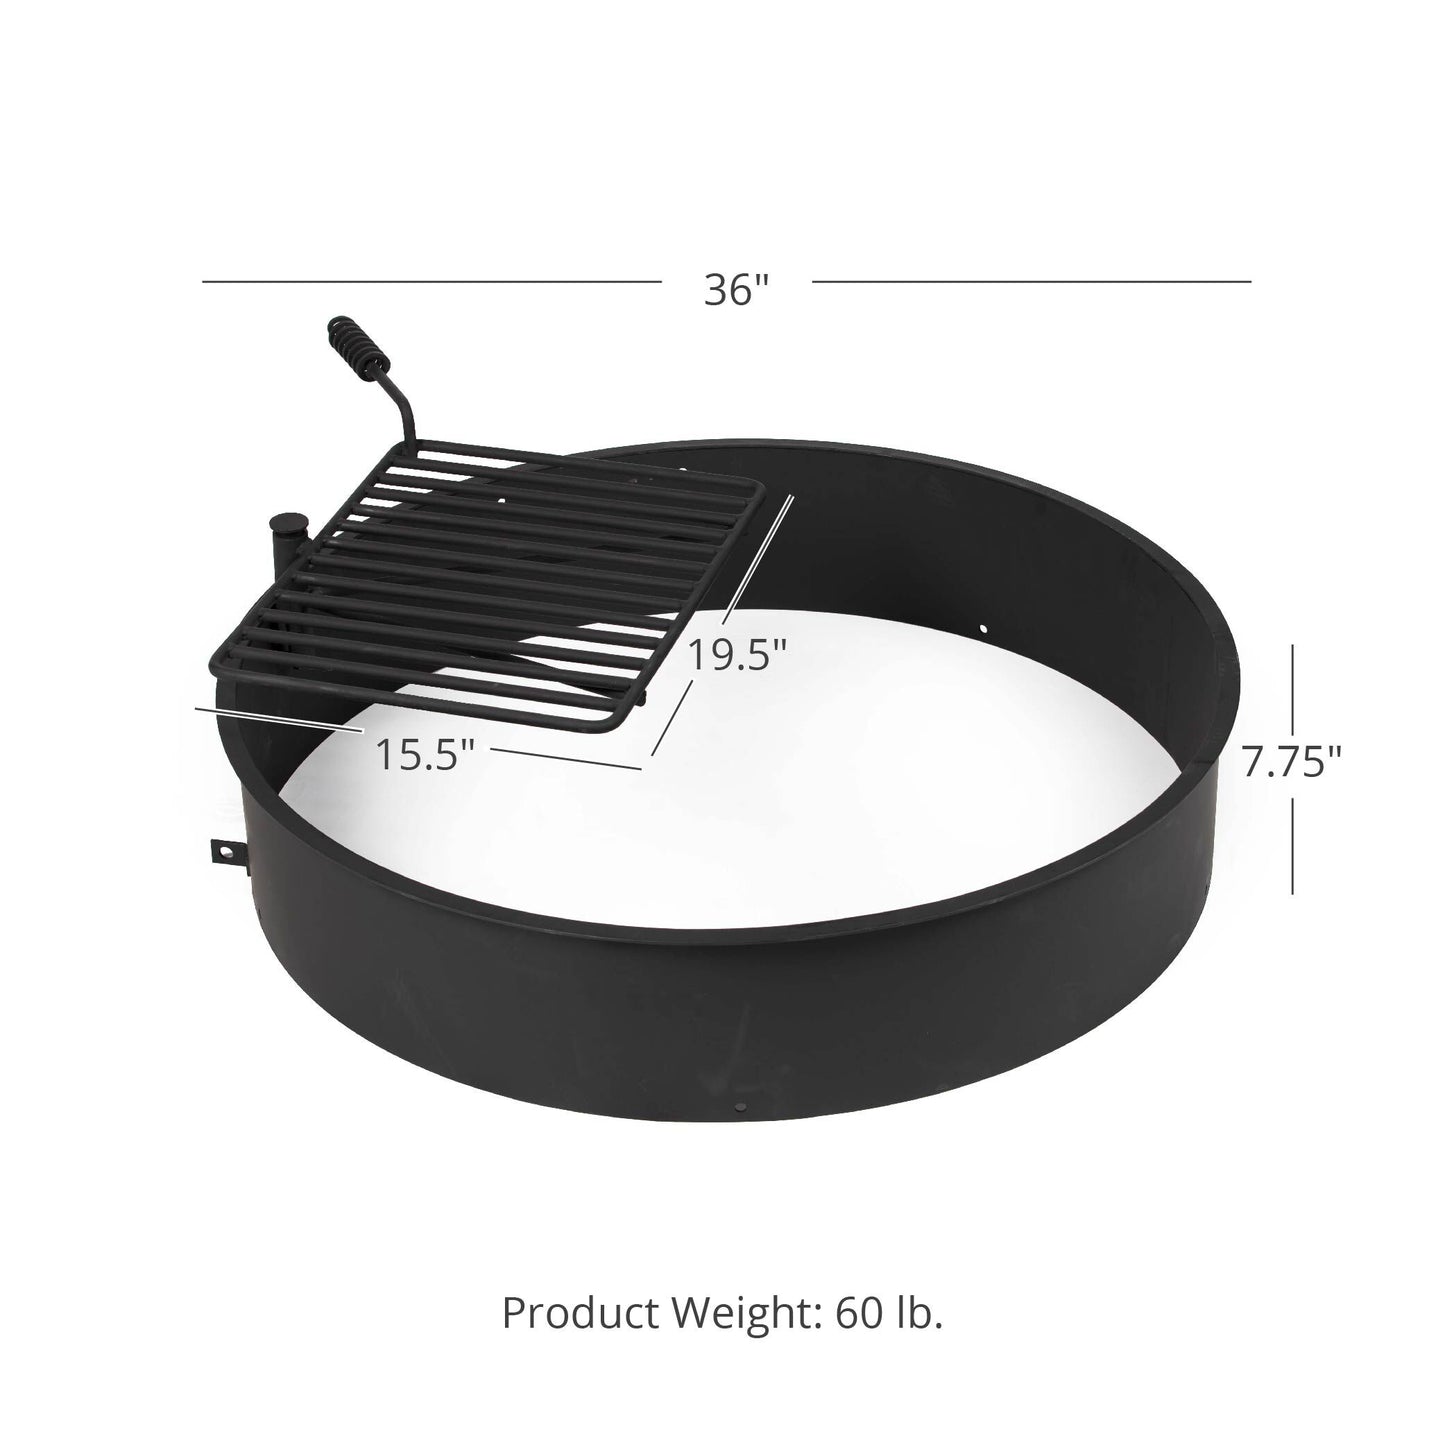 Steel Camp Fire Ring & Outdoor Cooking Grate - Fire Ring Size: 36" | 36" - view 18